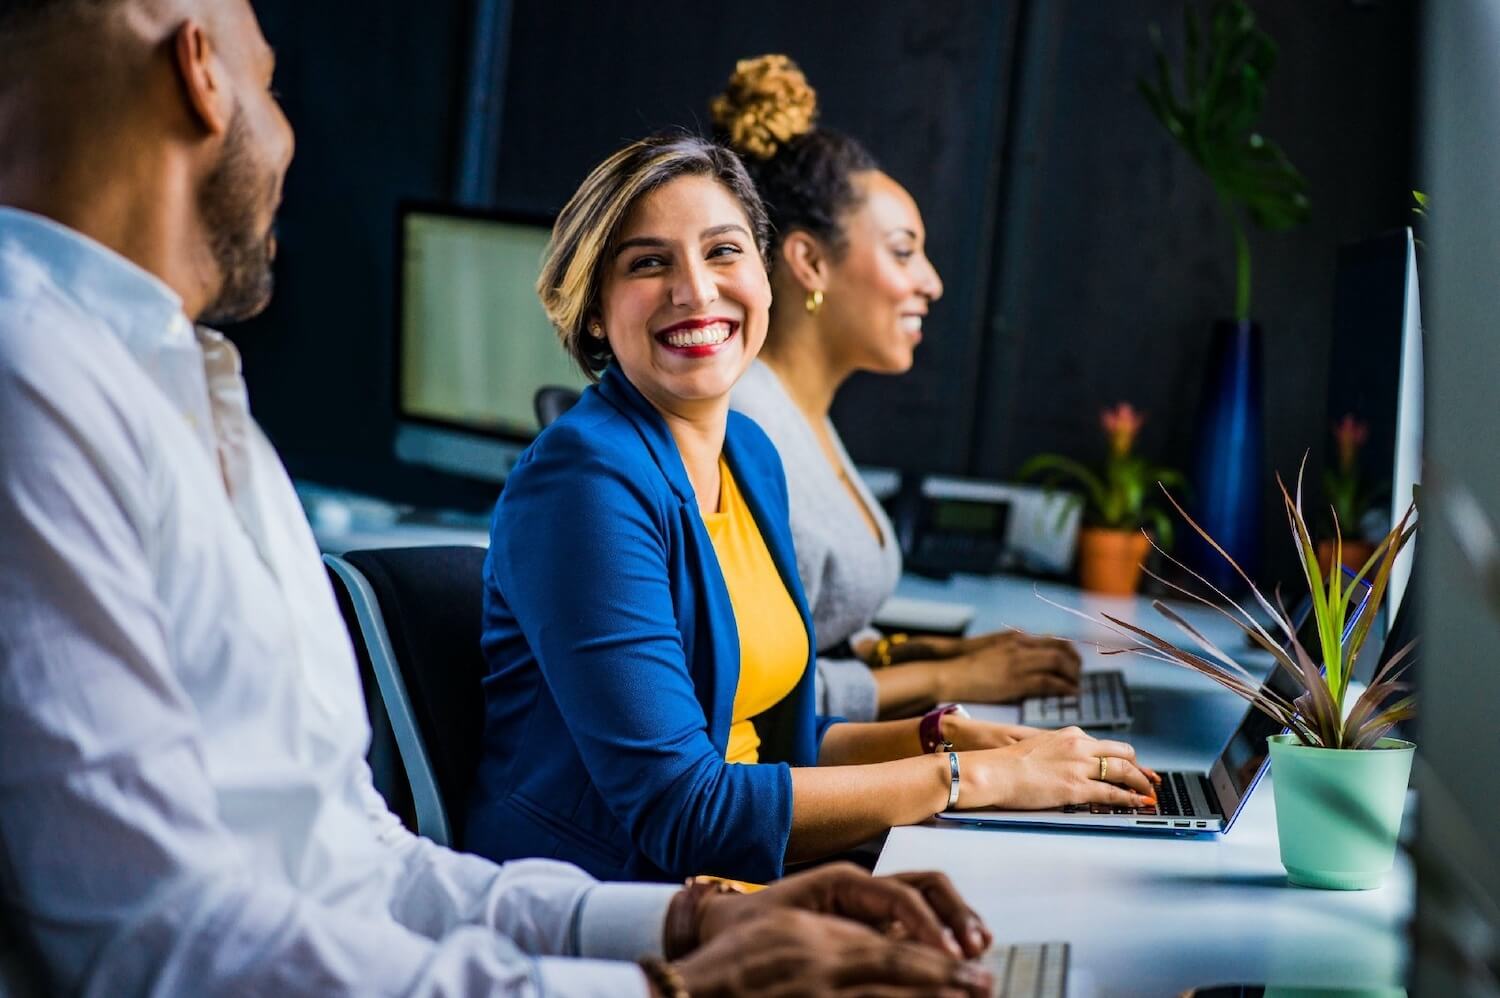 Female professional smiling and sitting in office with colleagues and using laptop to secure emails